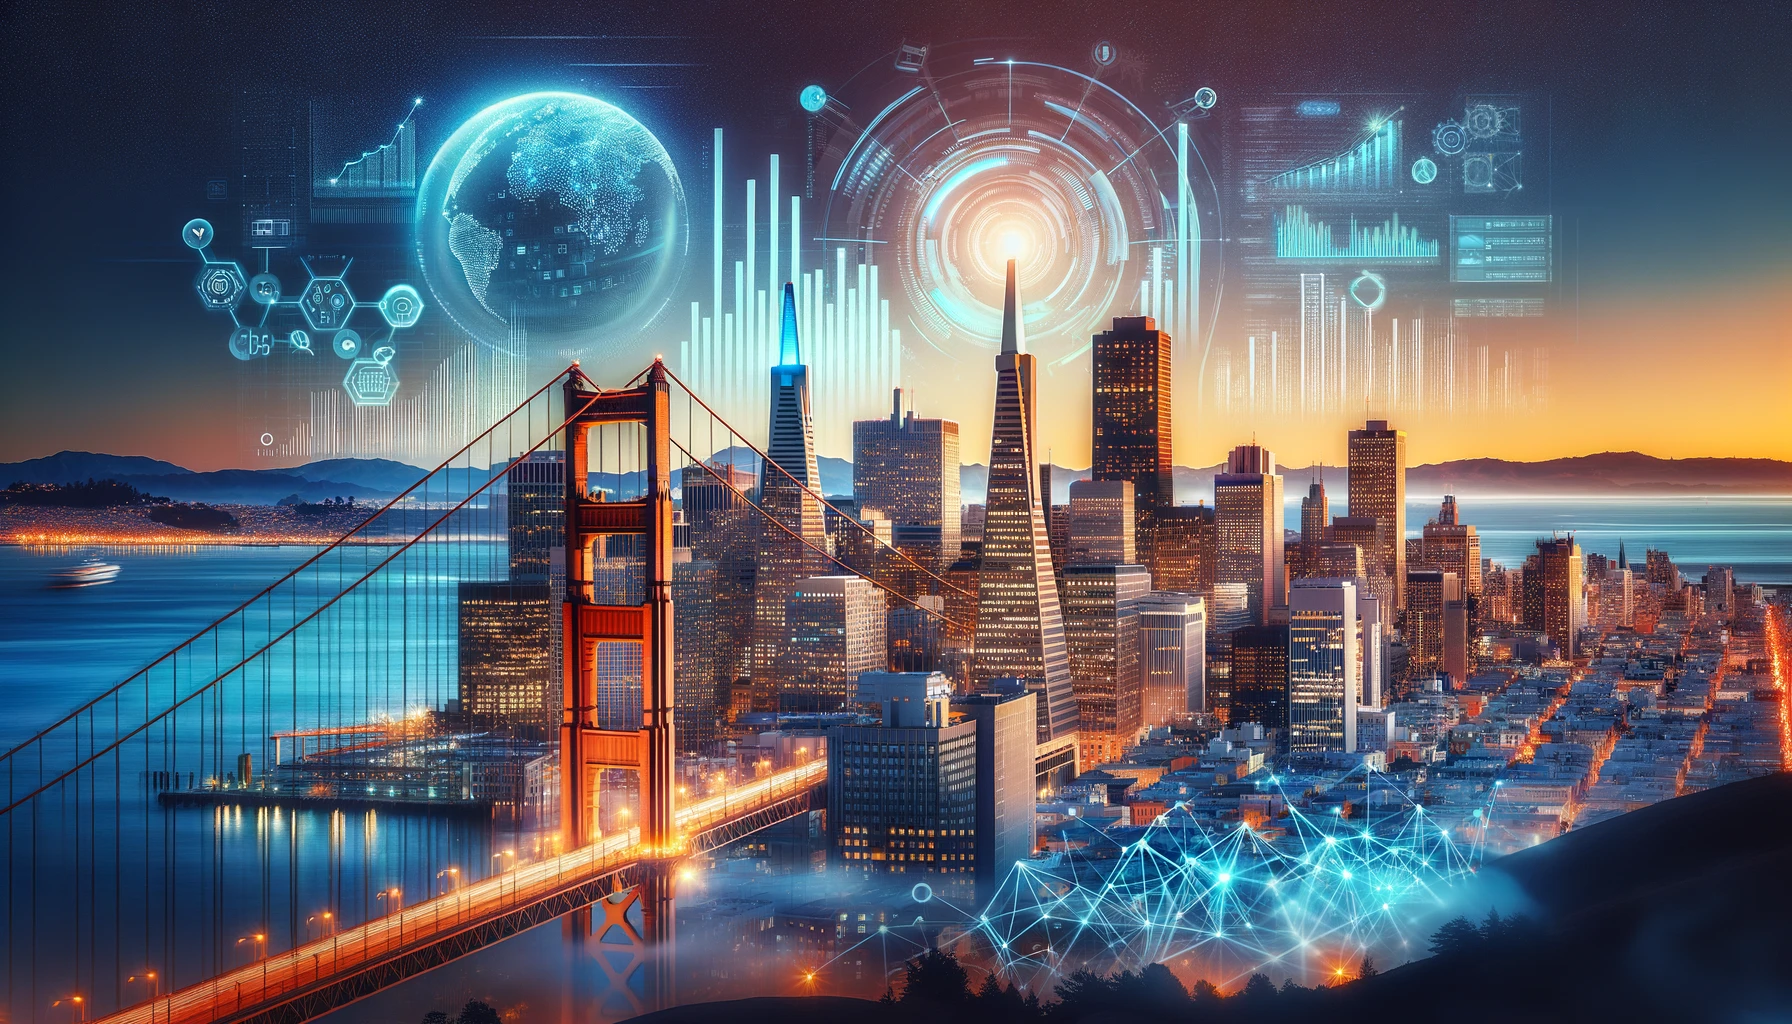 The San Francisco skyline at dusk, illuminated by the vibrant glow of innovation, with iconic landmarks like the Golden Gate Bridge and the Transamerica Pyramid, intertwined with symbols of venture capital such as upward graphs and digital networks.